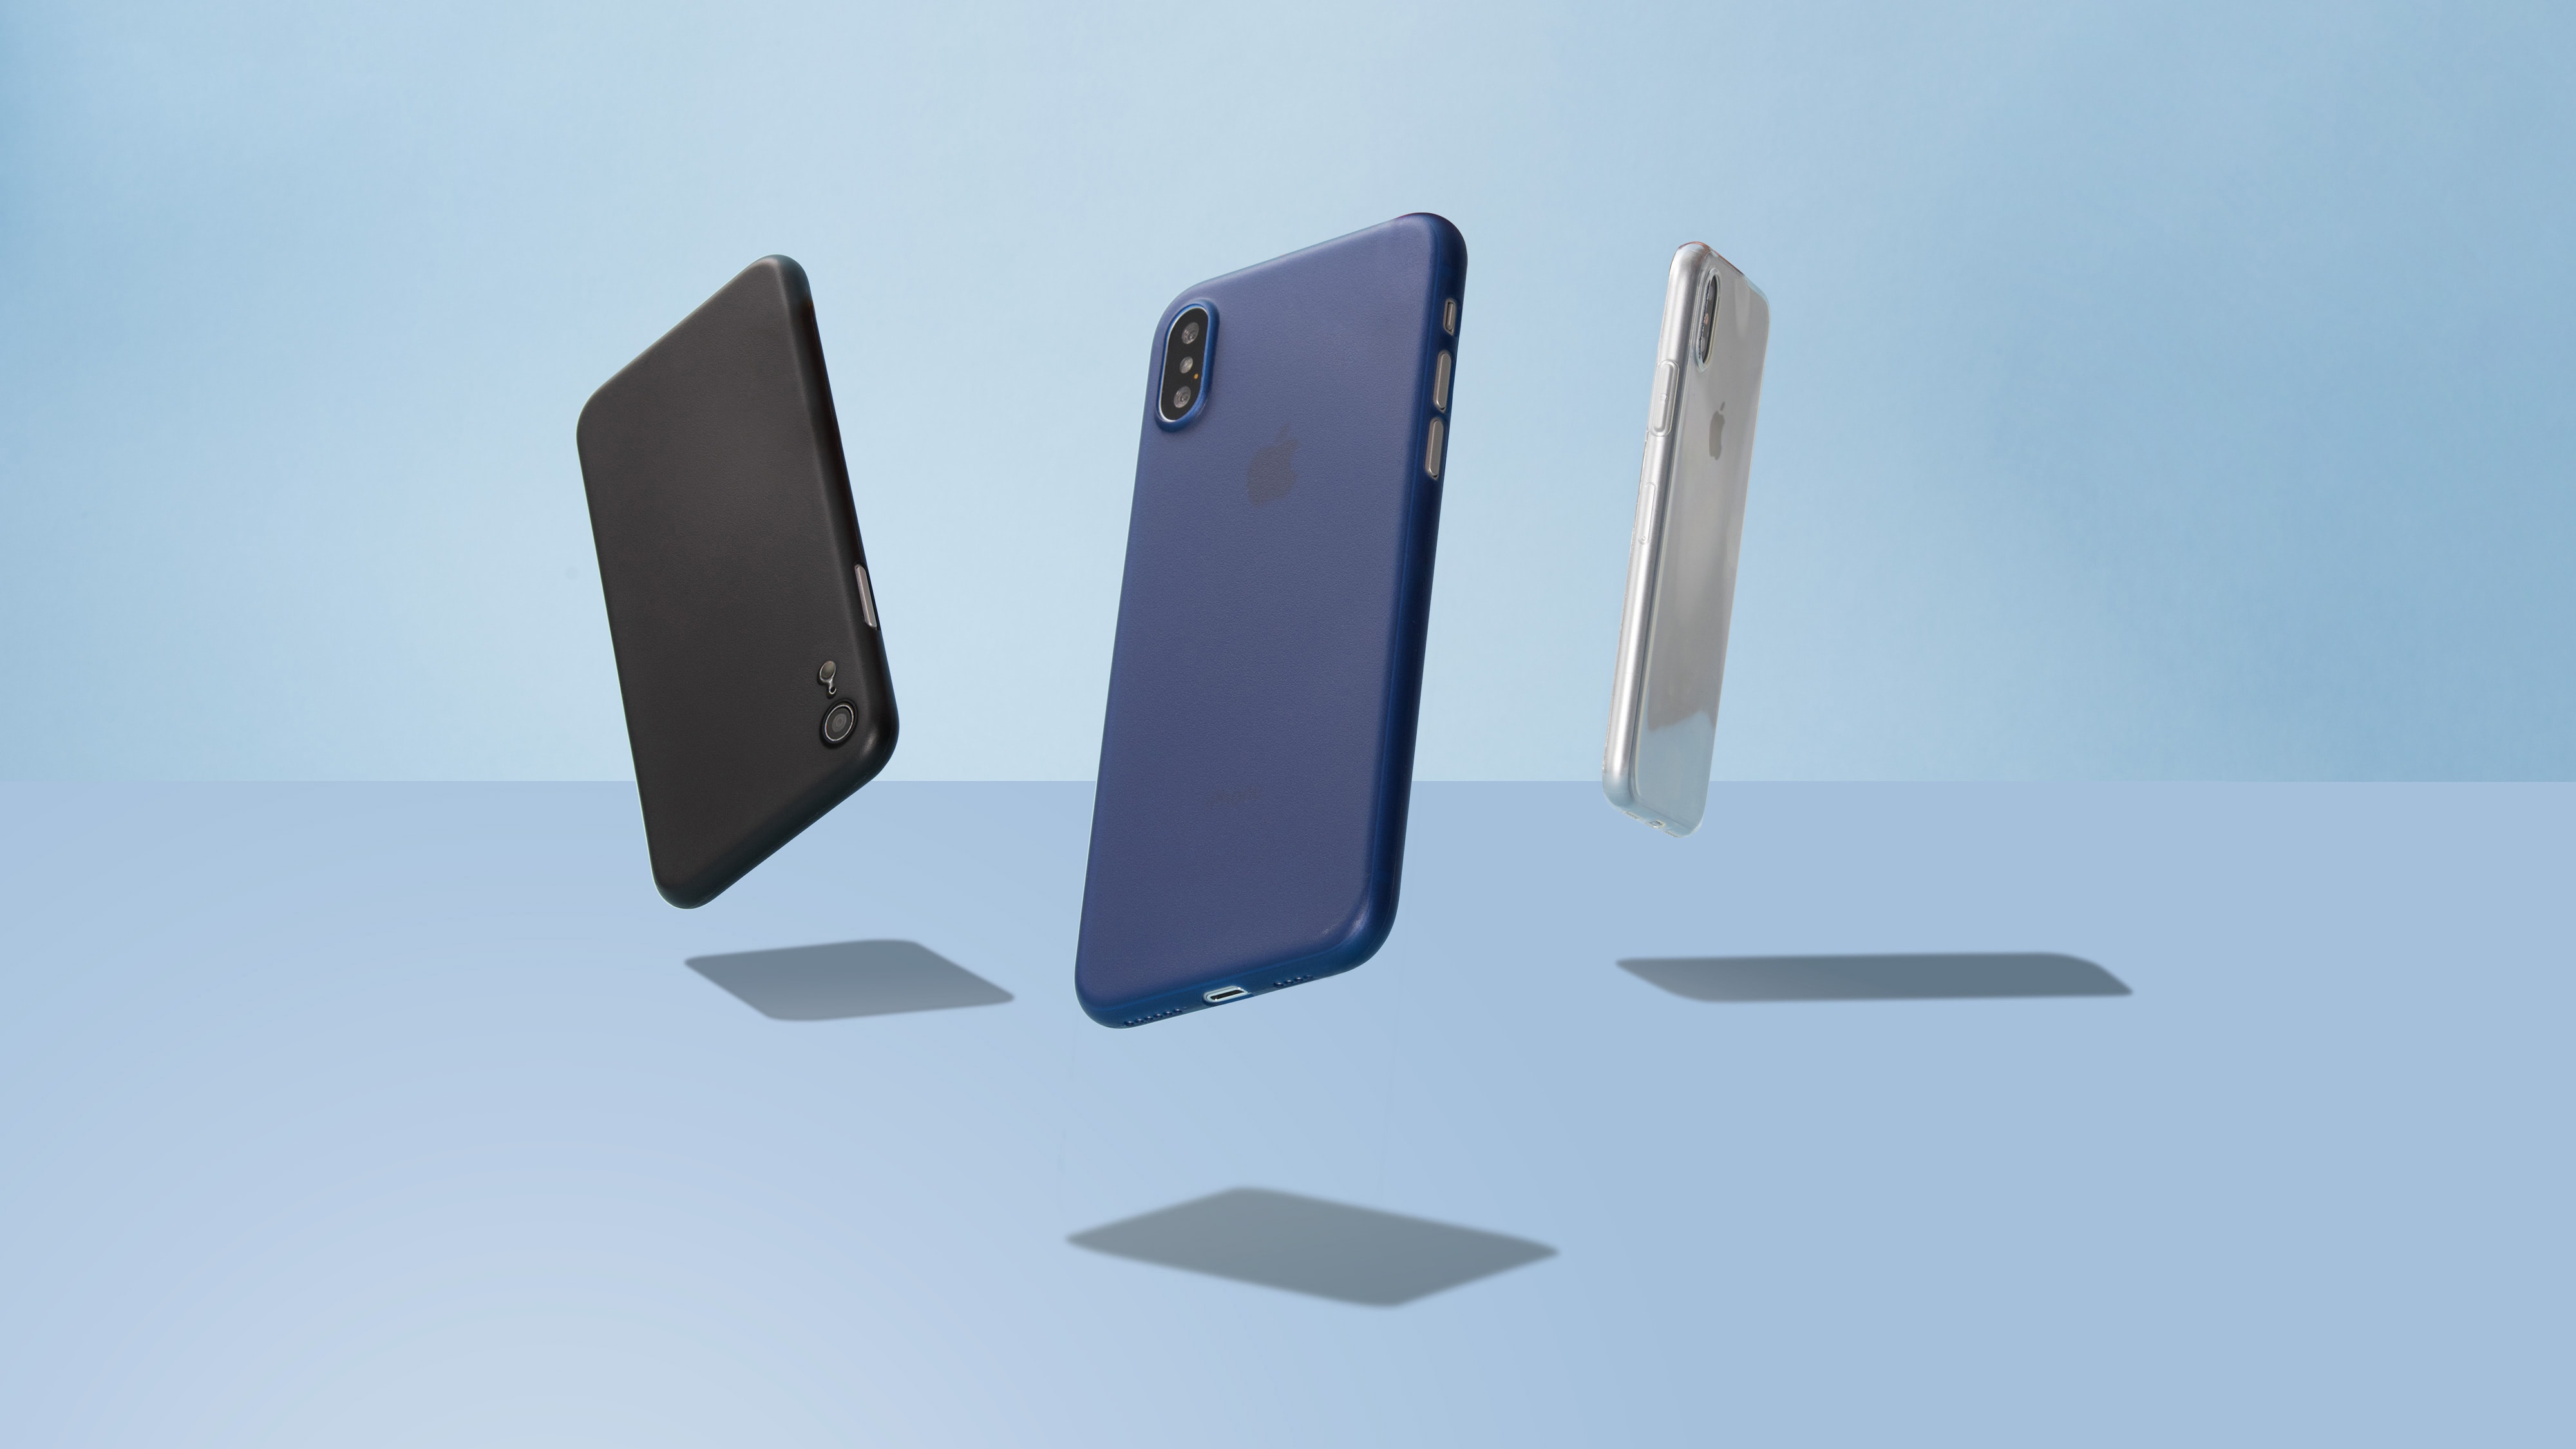 Totallee's amazingly slim iPhone cases are currently available for 30 percent off the usual price.